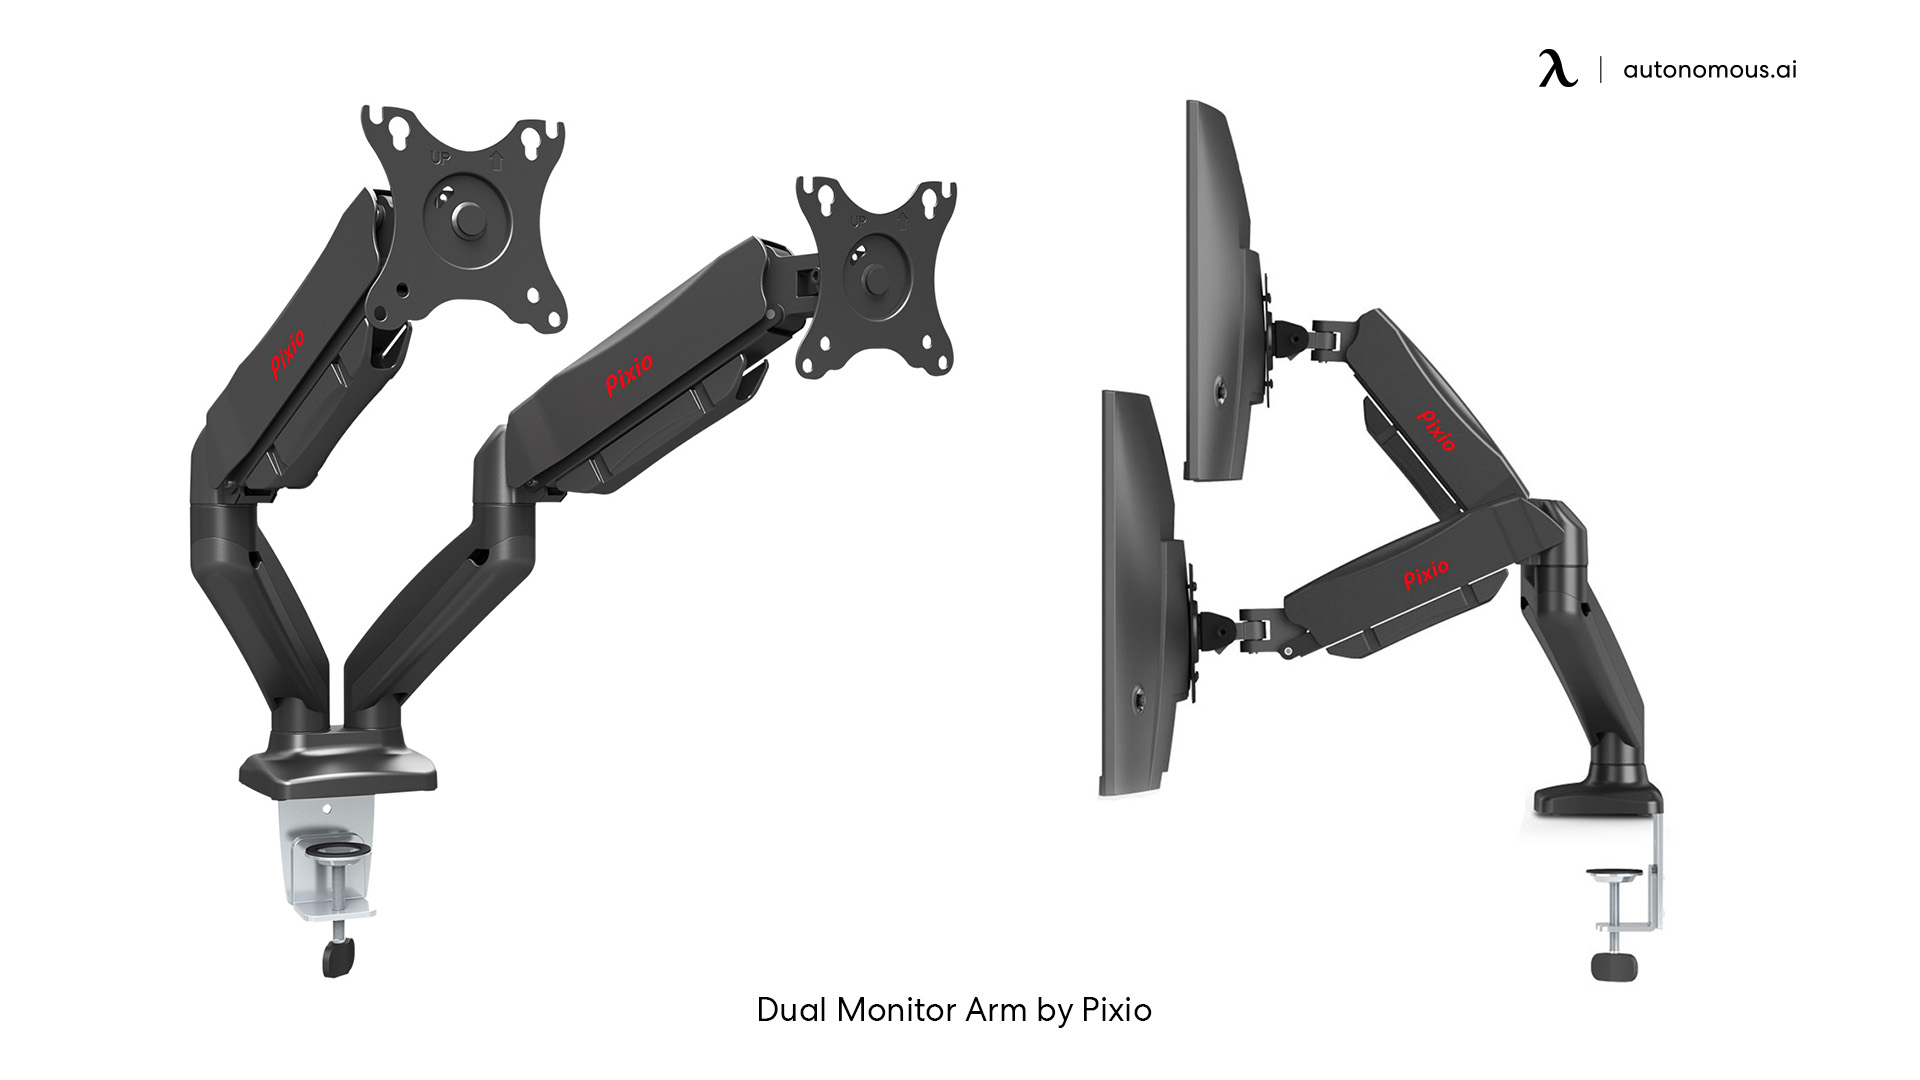 Dual monitor arm by Pixio for Xbox gaming setup